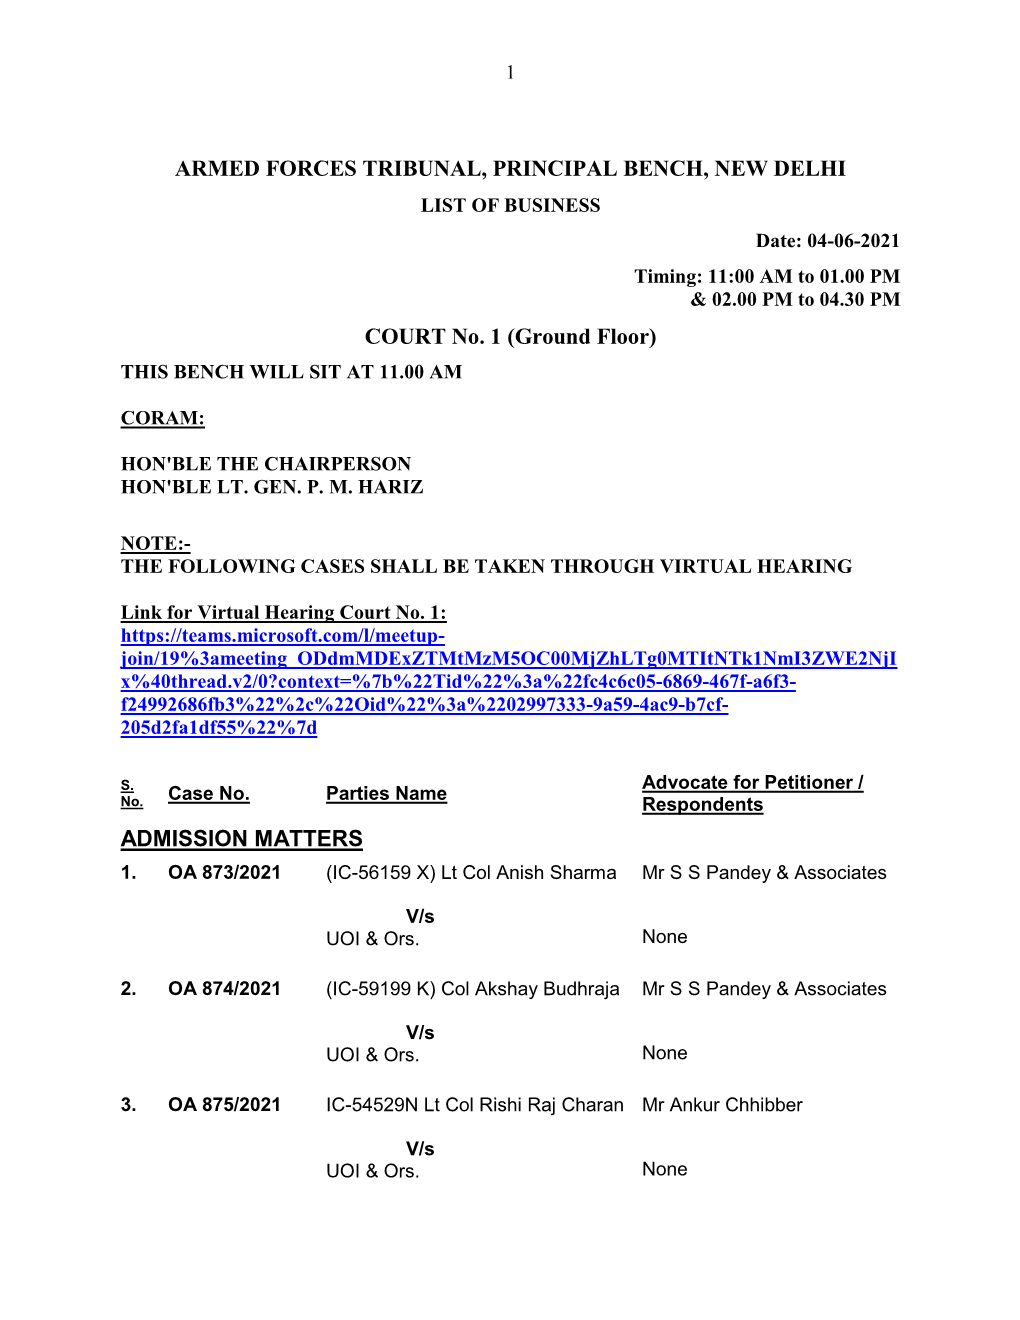 ARMED FORCES TRIBUNAL, PRINCIPAL BENCH, NEW DELHI LIST of BUSINESS Date: 04-06-2021 Timing: 11:00 AM to 01.00 PM & 02.00 PM to 04.30 PM COURT No